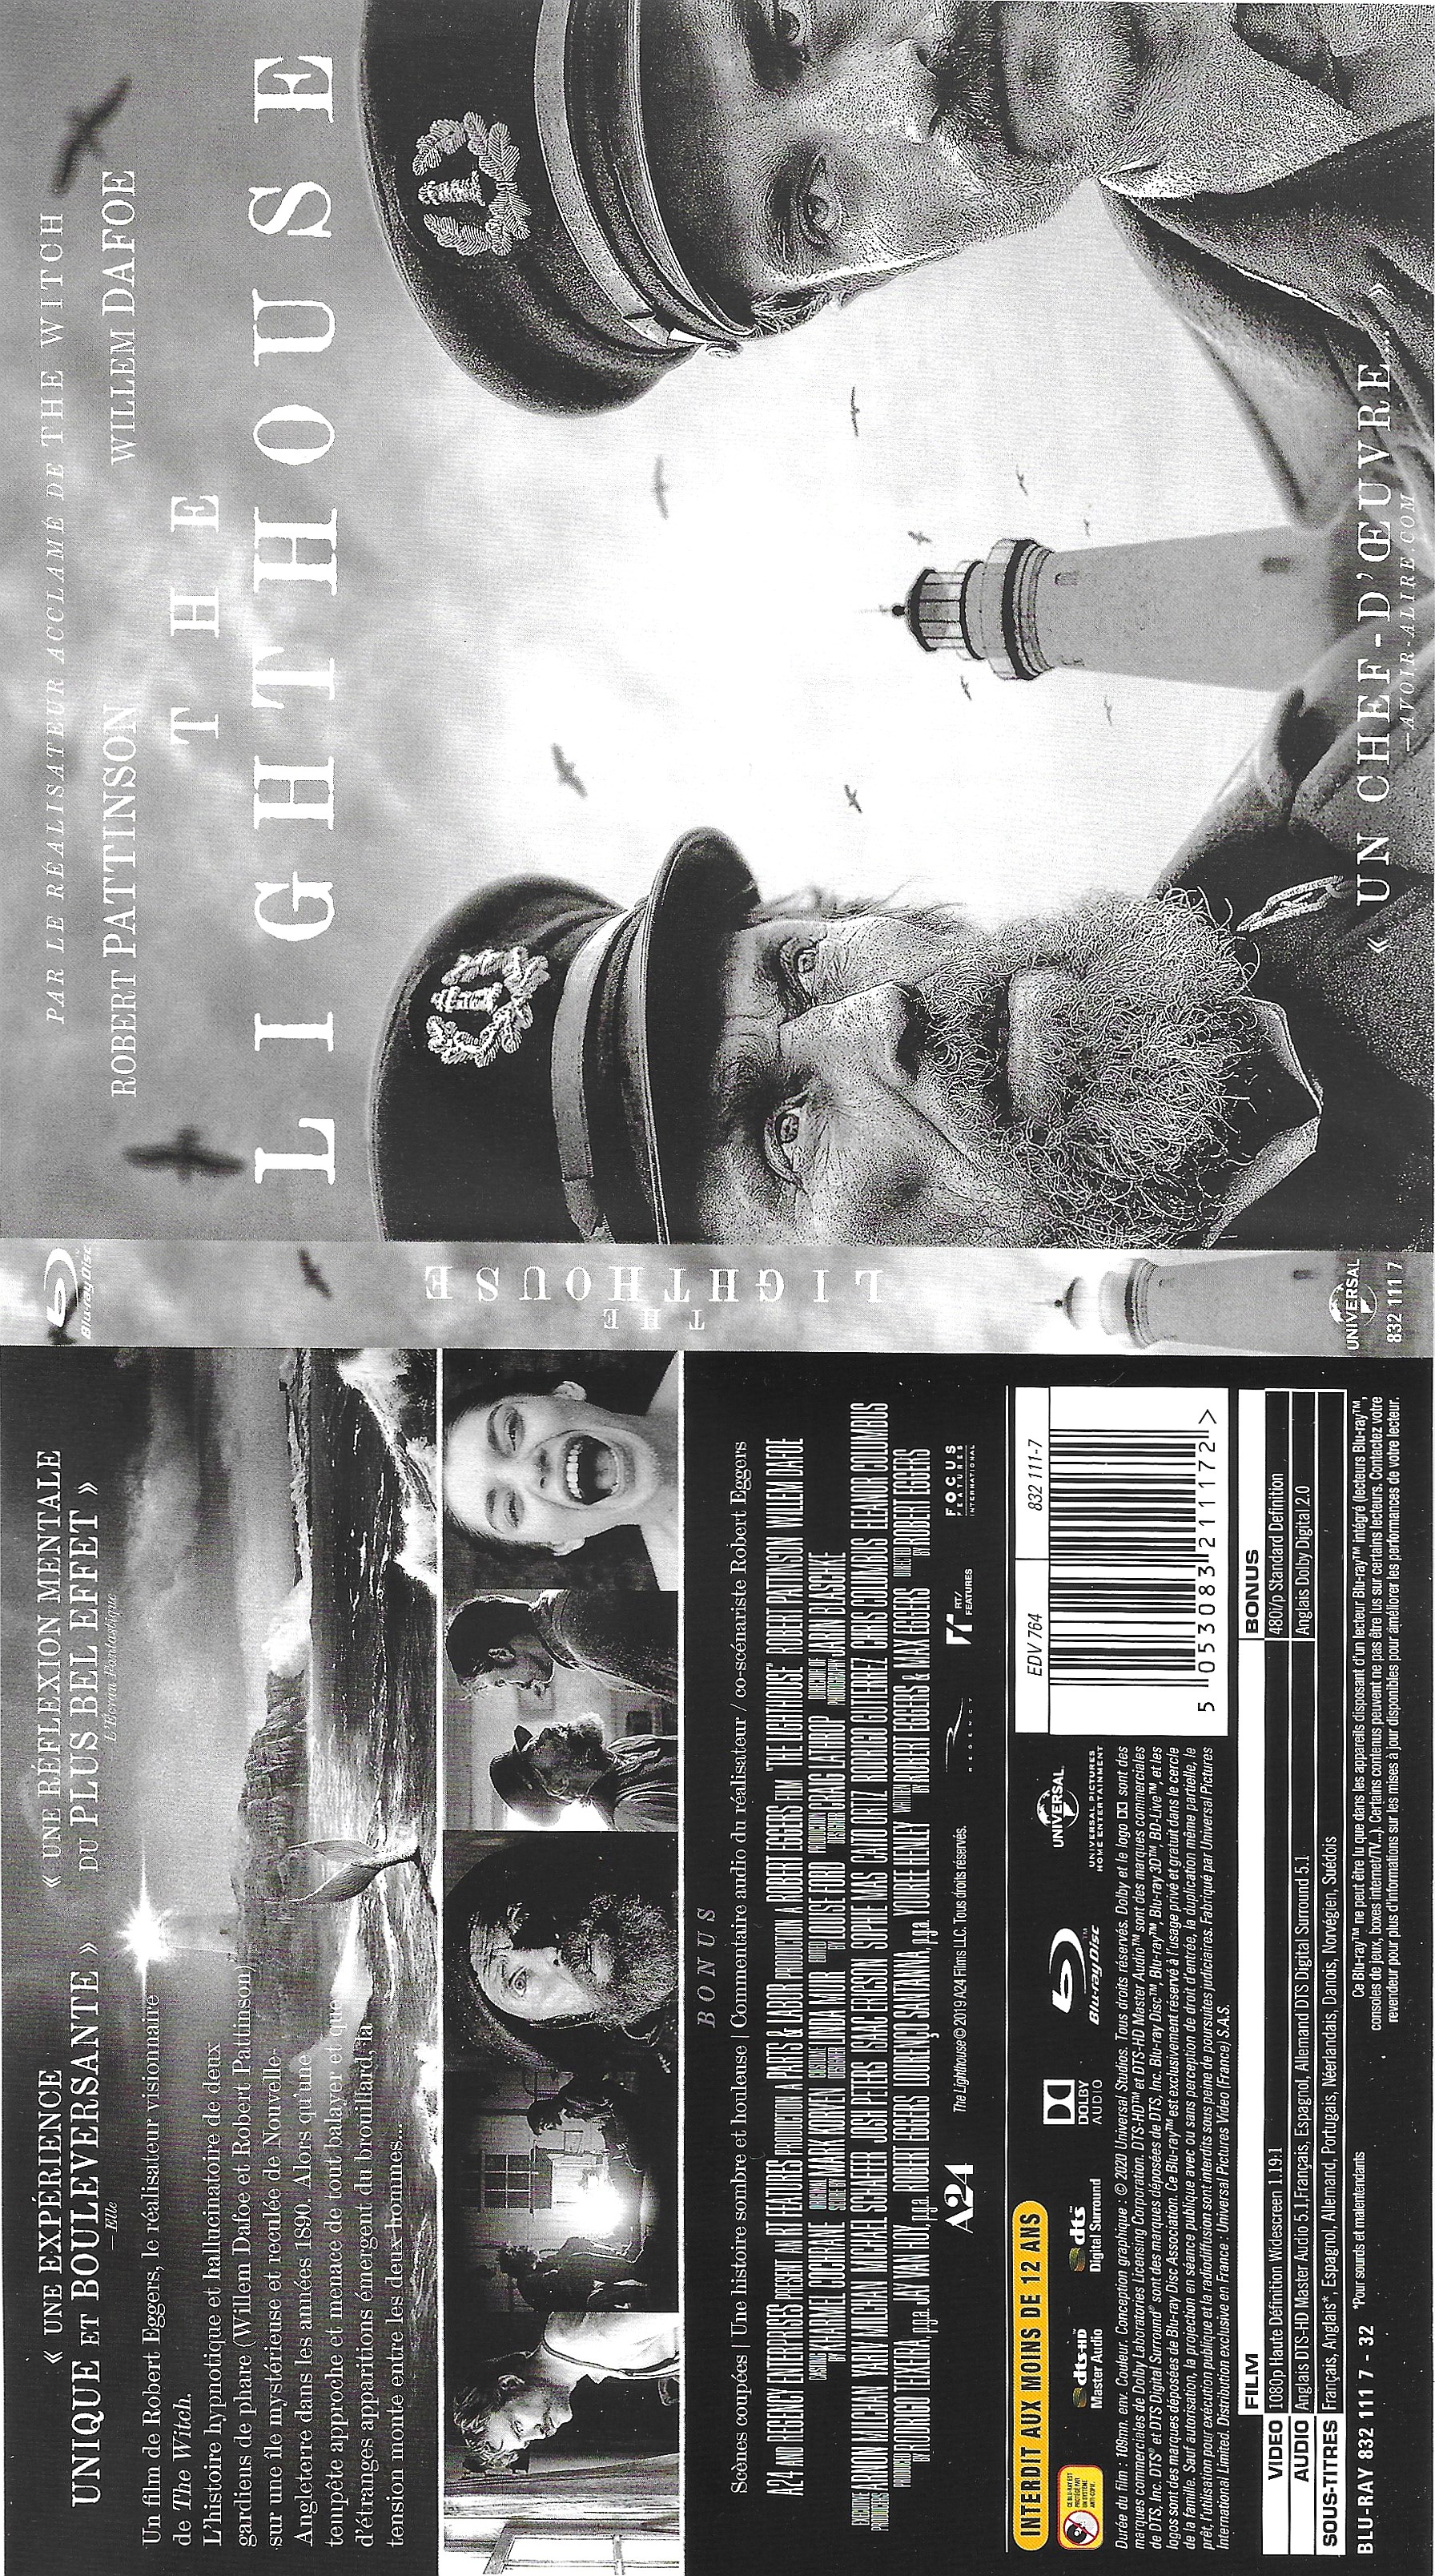 Jaquette DVD The Lighthouse (BLU-RAY)